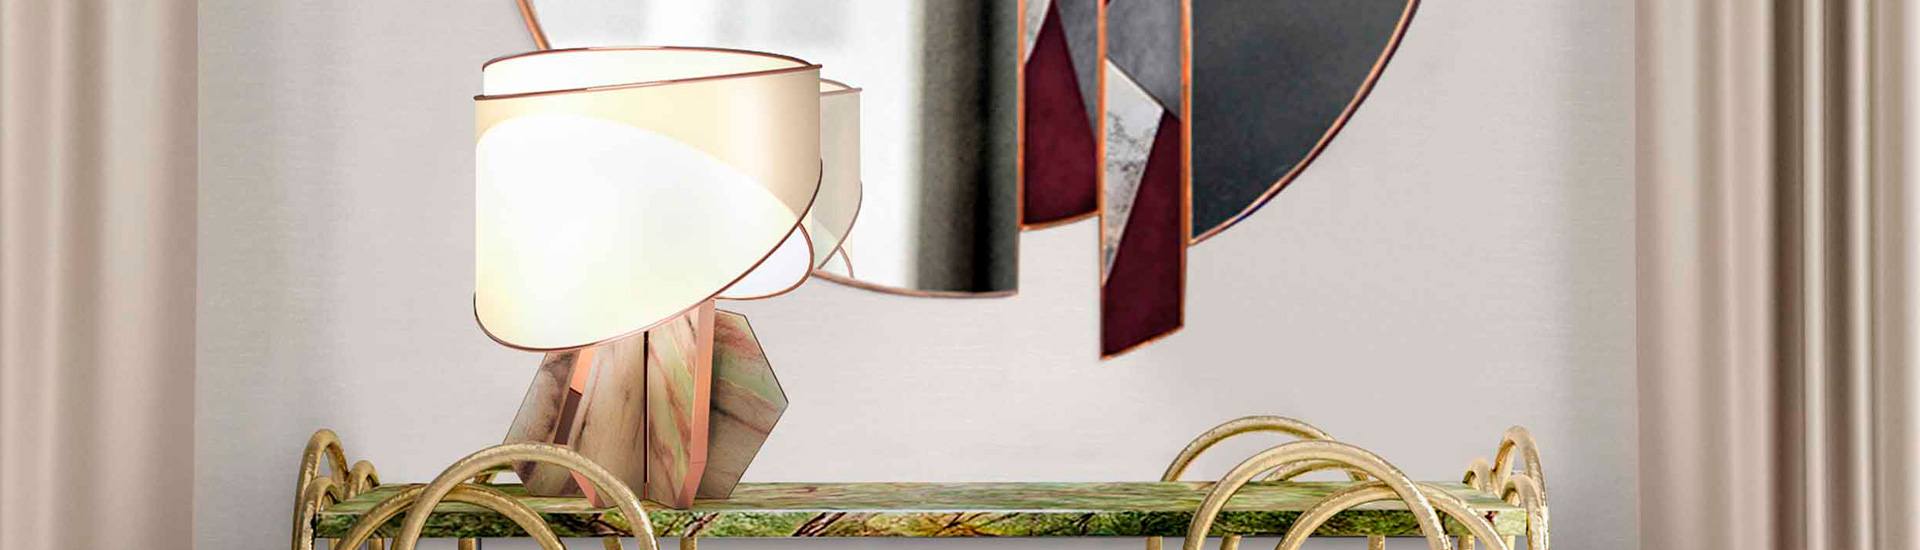 Origami Sconce wall lamp